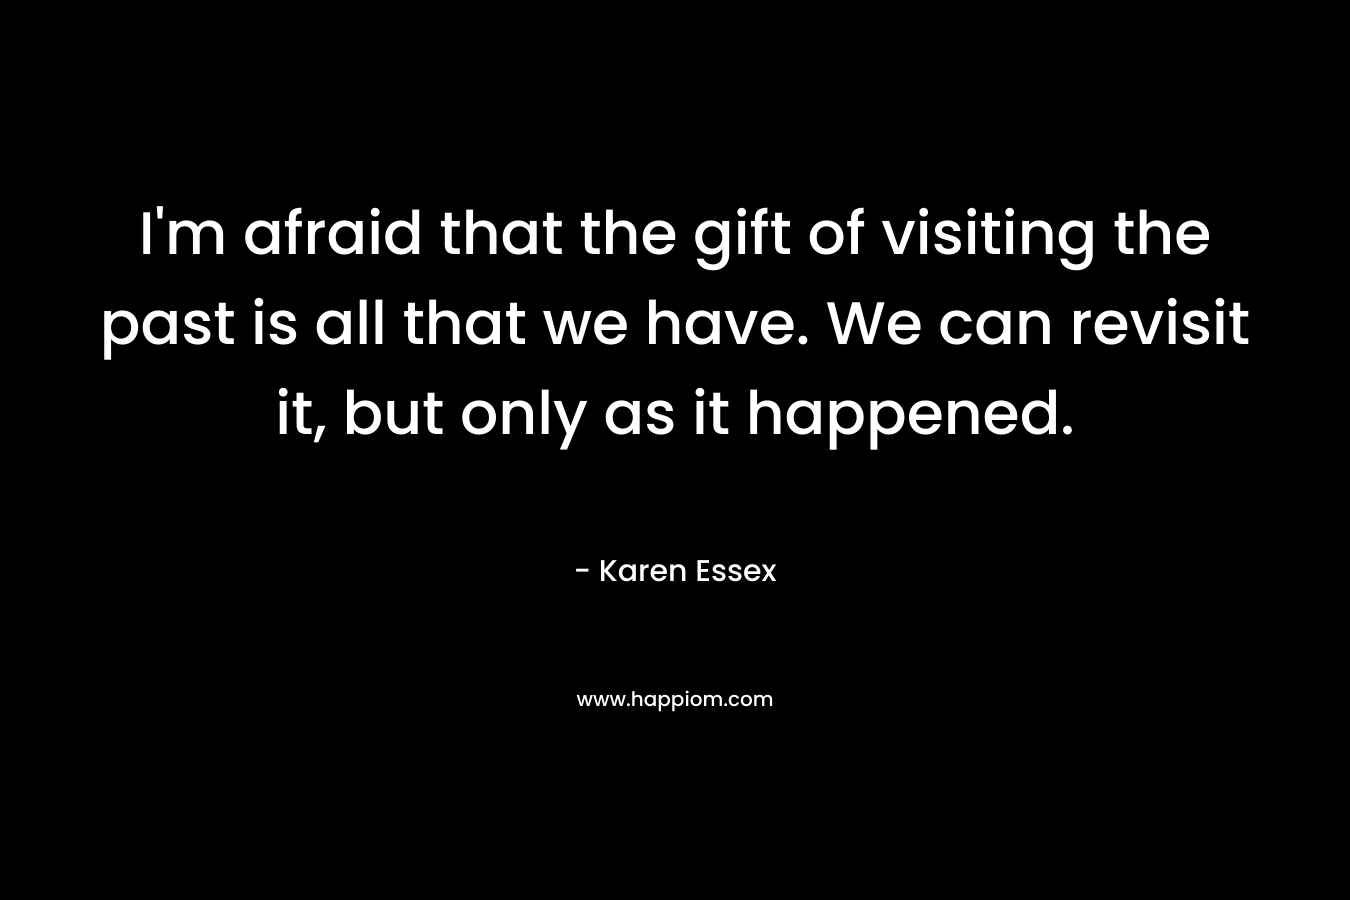 I’m afraid that the gift of visiting the past is all that we have. We can revisit it, but only as it happened. – Karen Essex